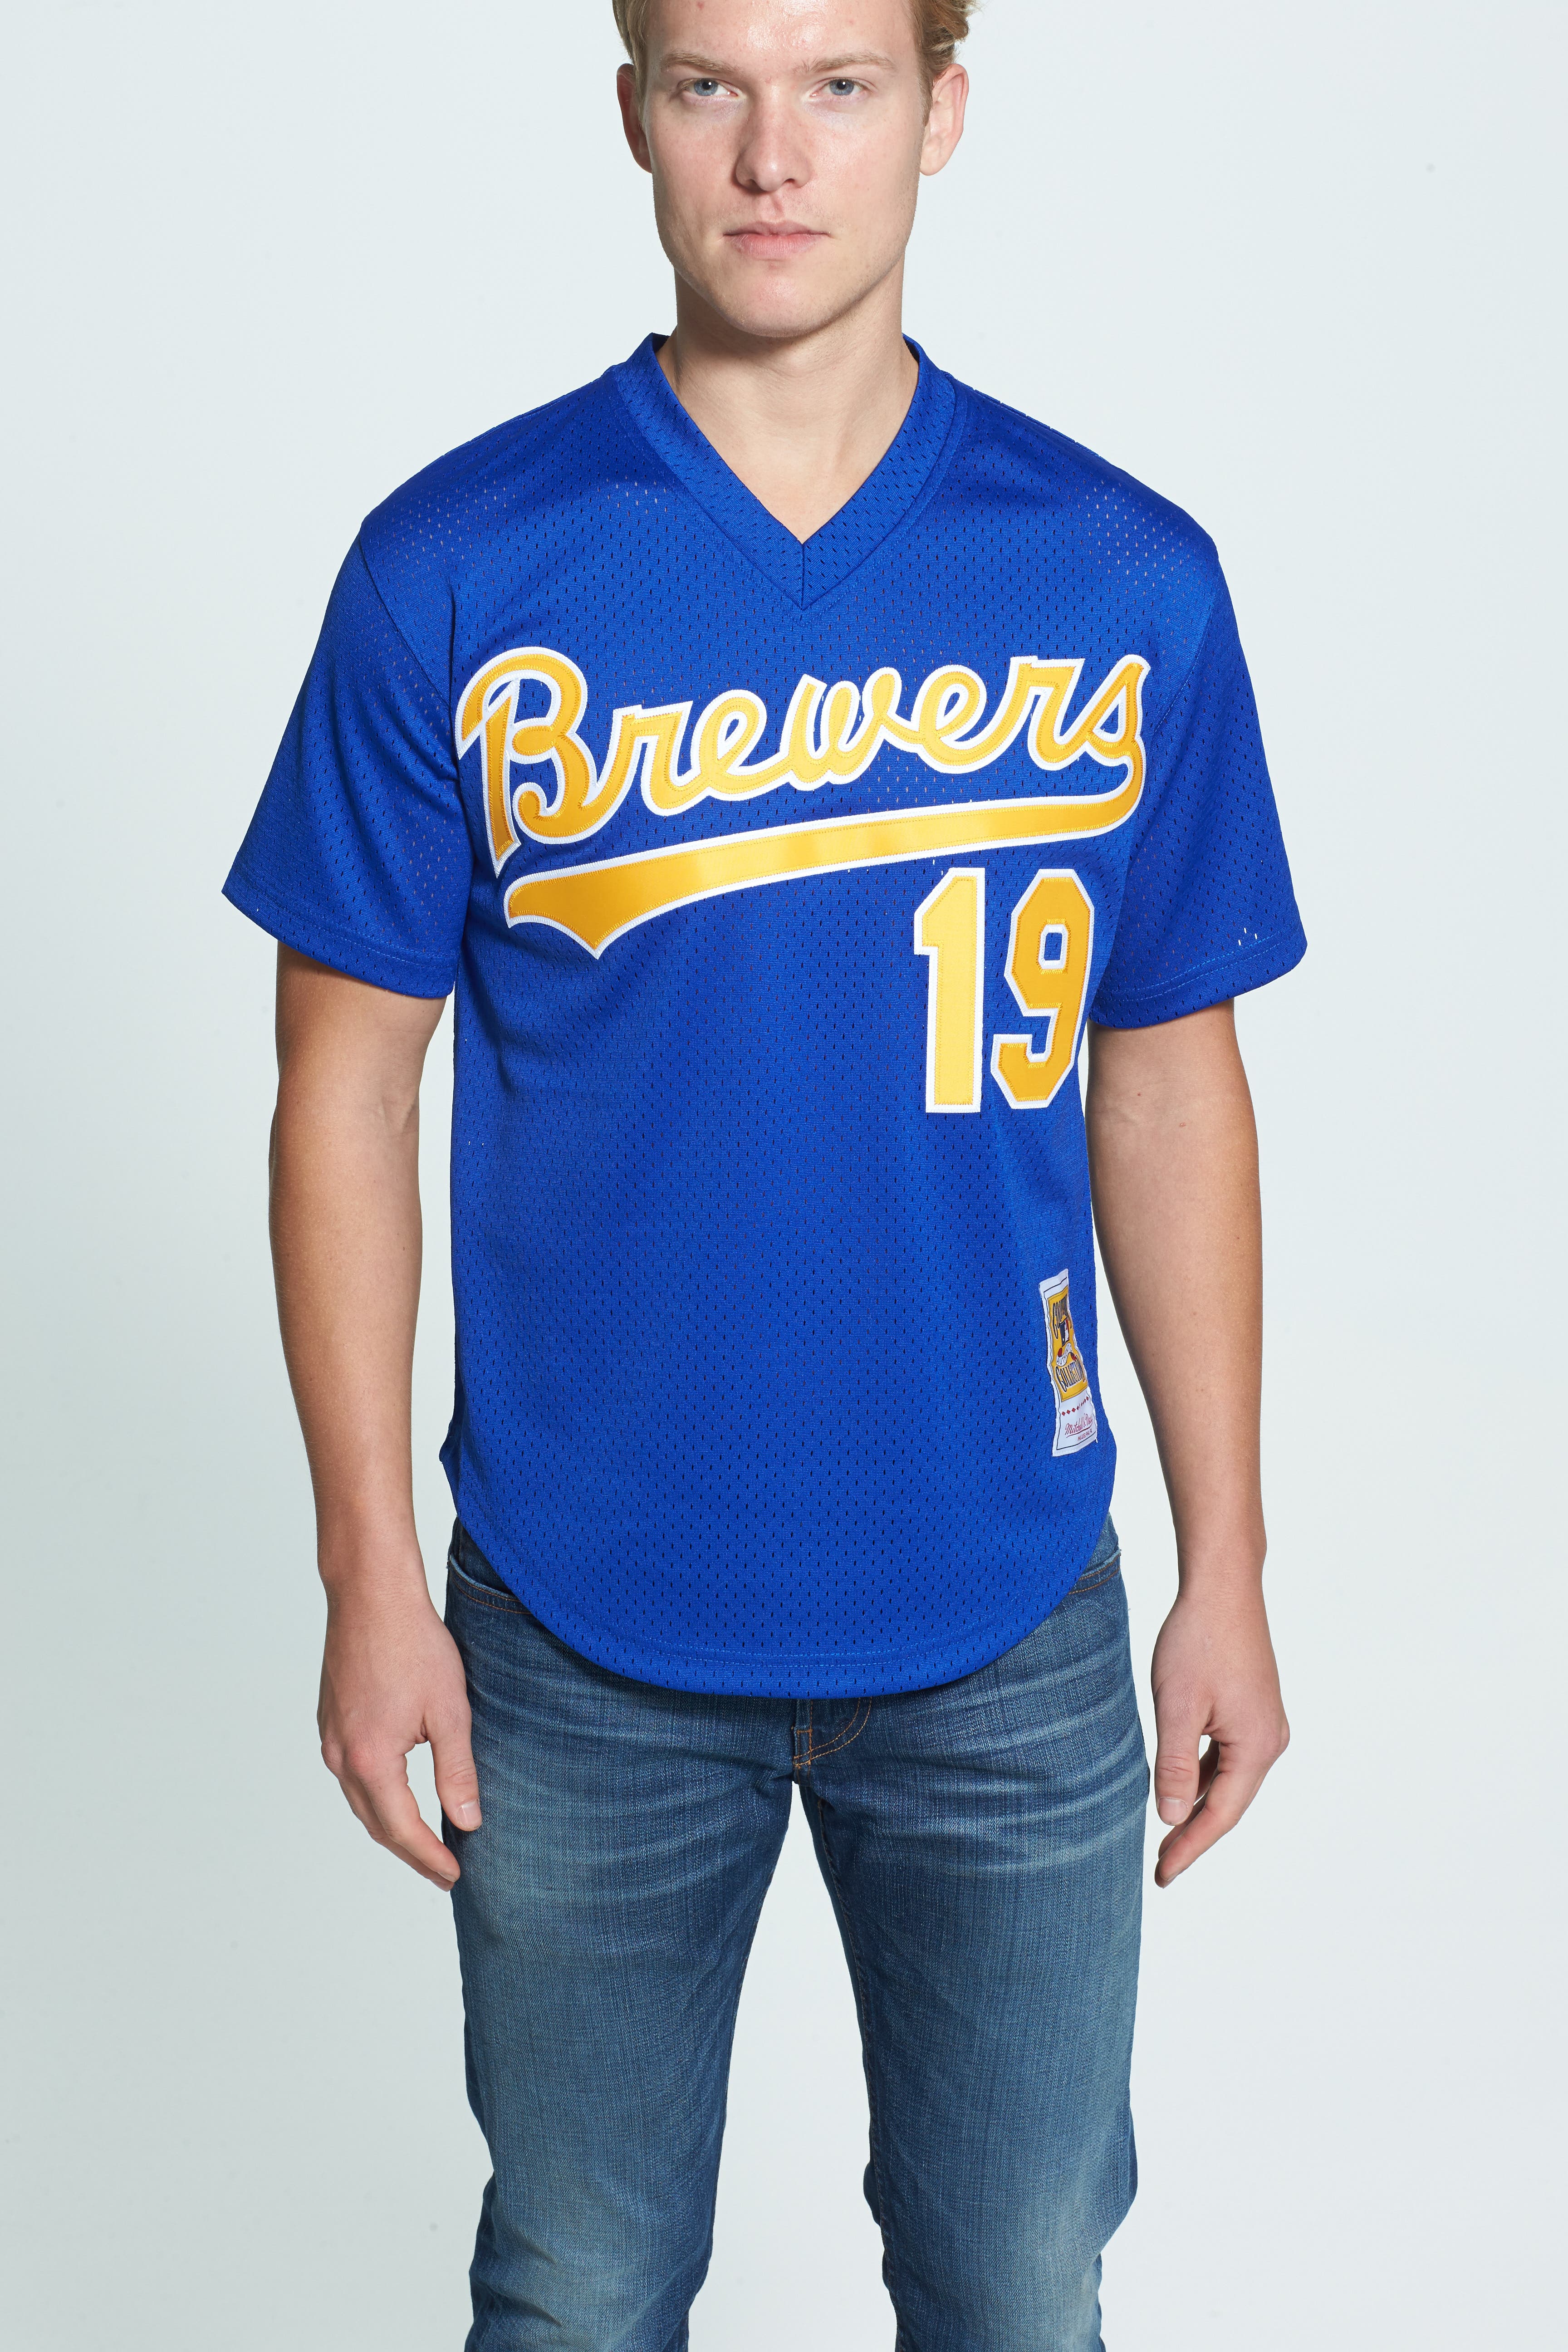 robin yount jersey authentic